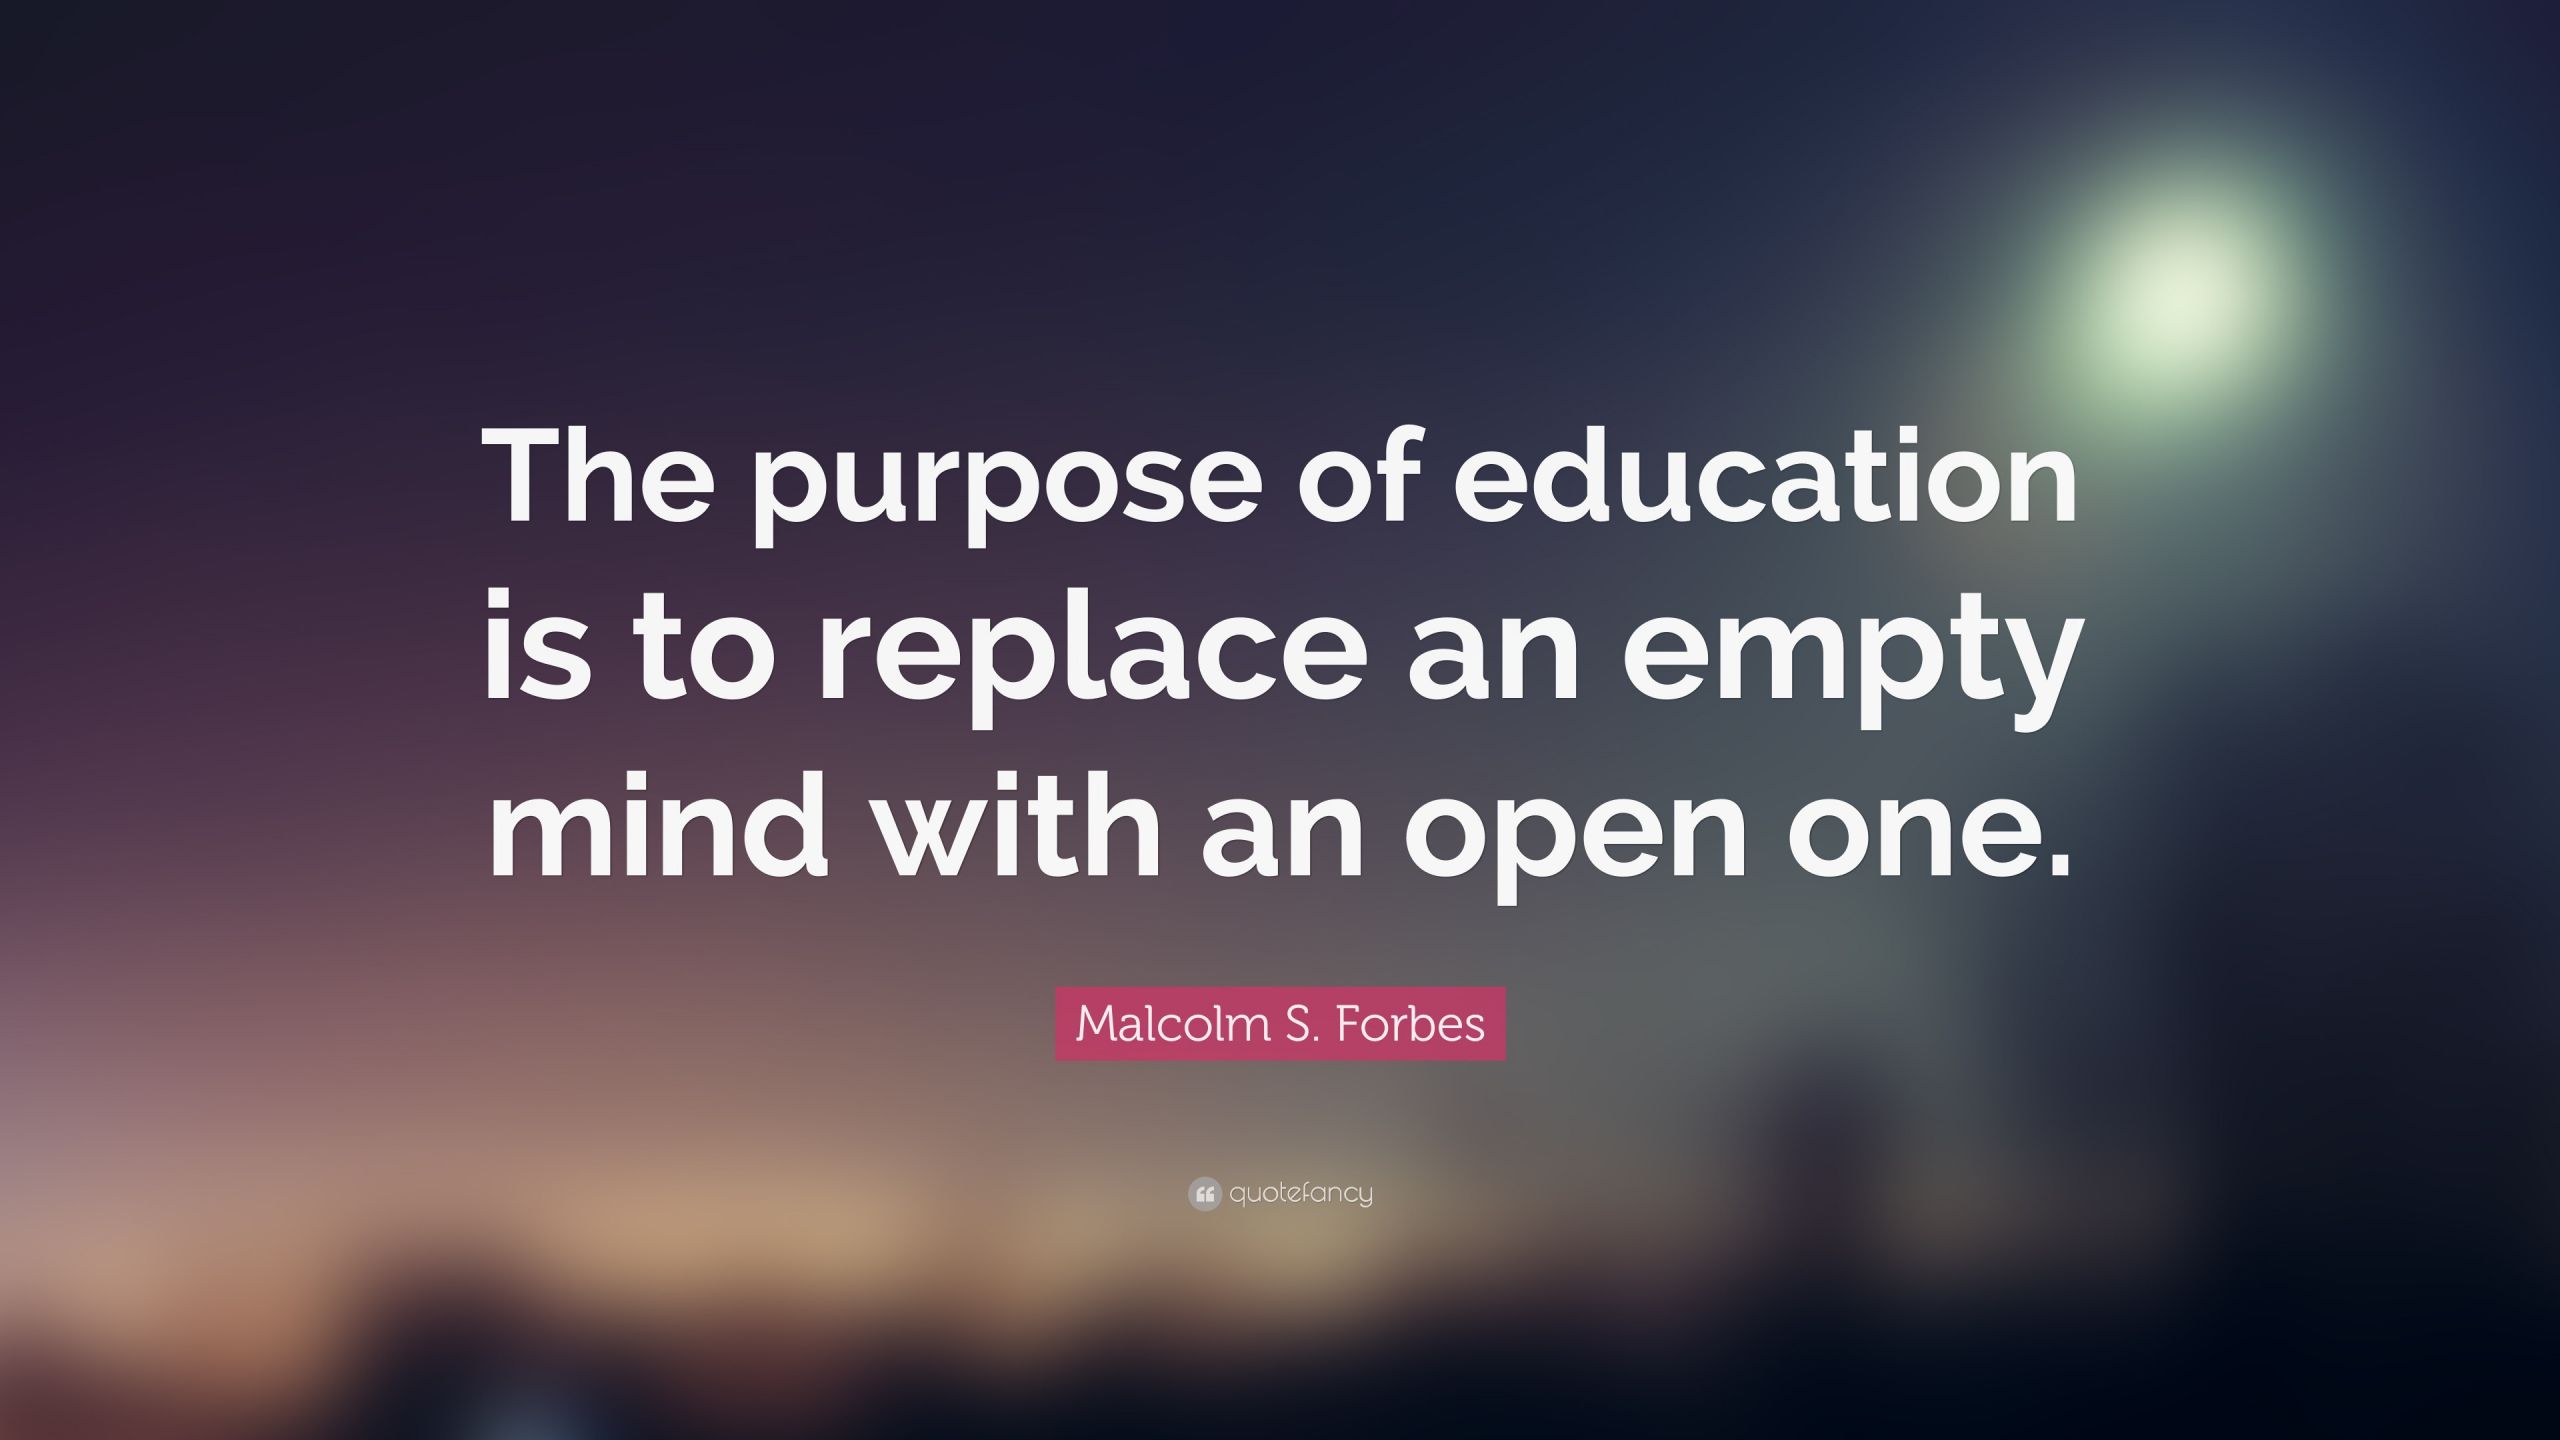 Purpose Of Education Quotes
 Malcolm S Forbes Quote “The purpose of education is to